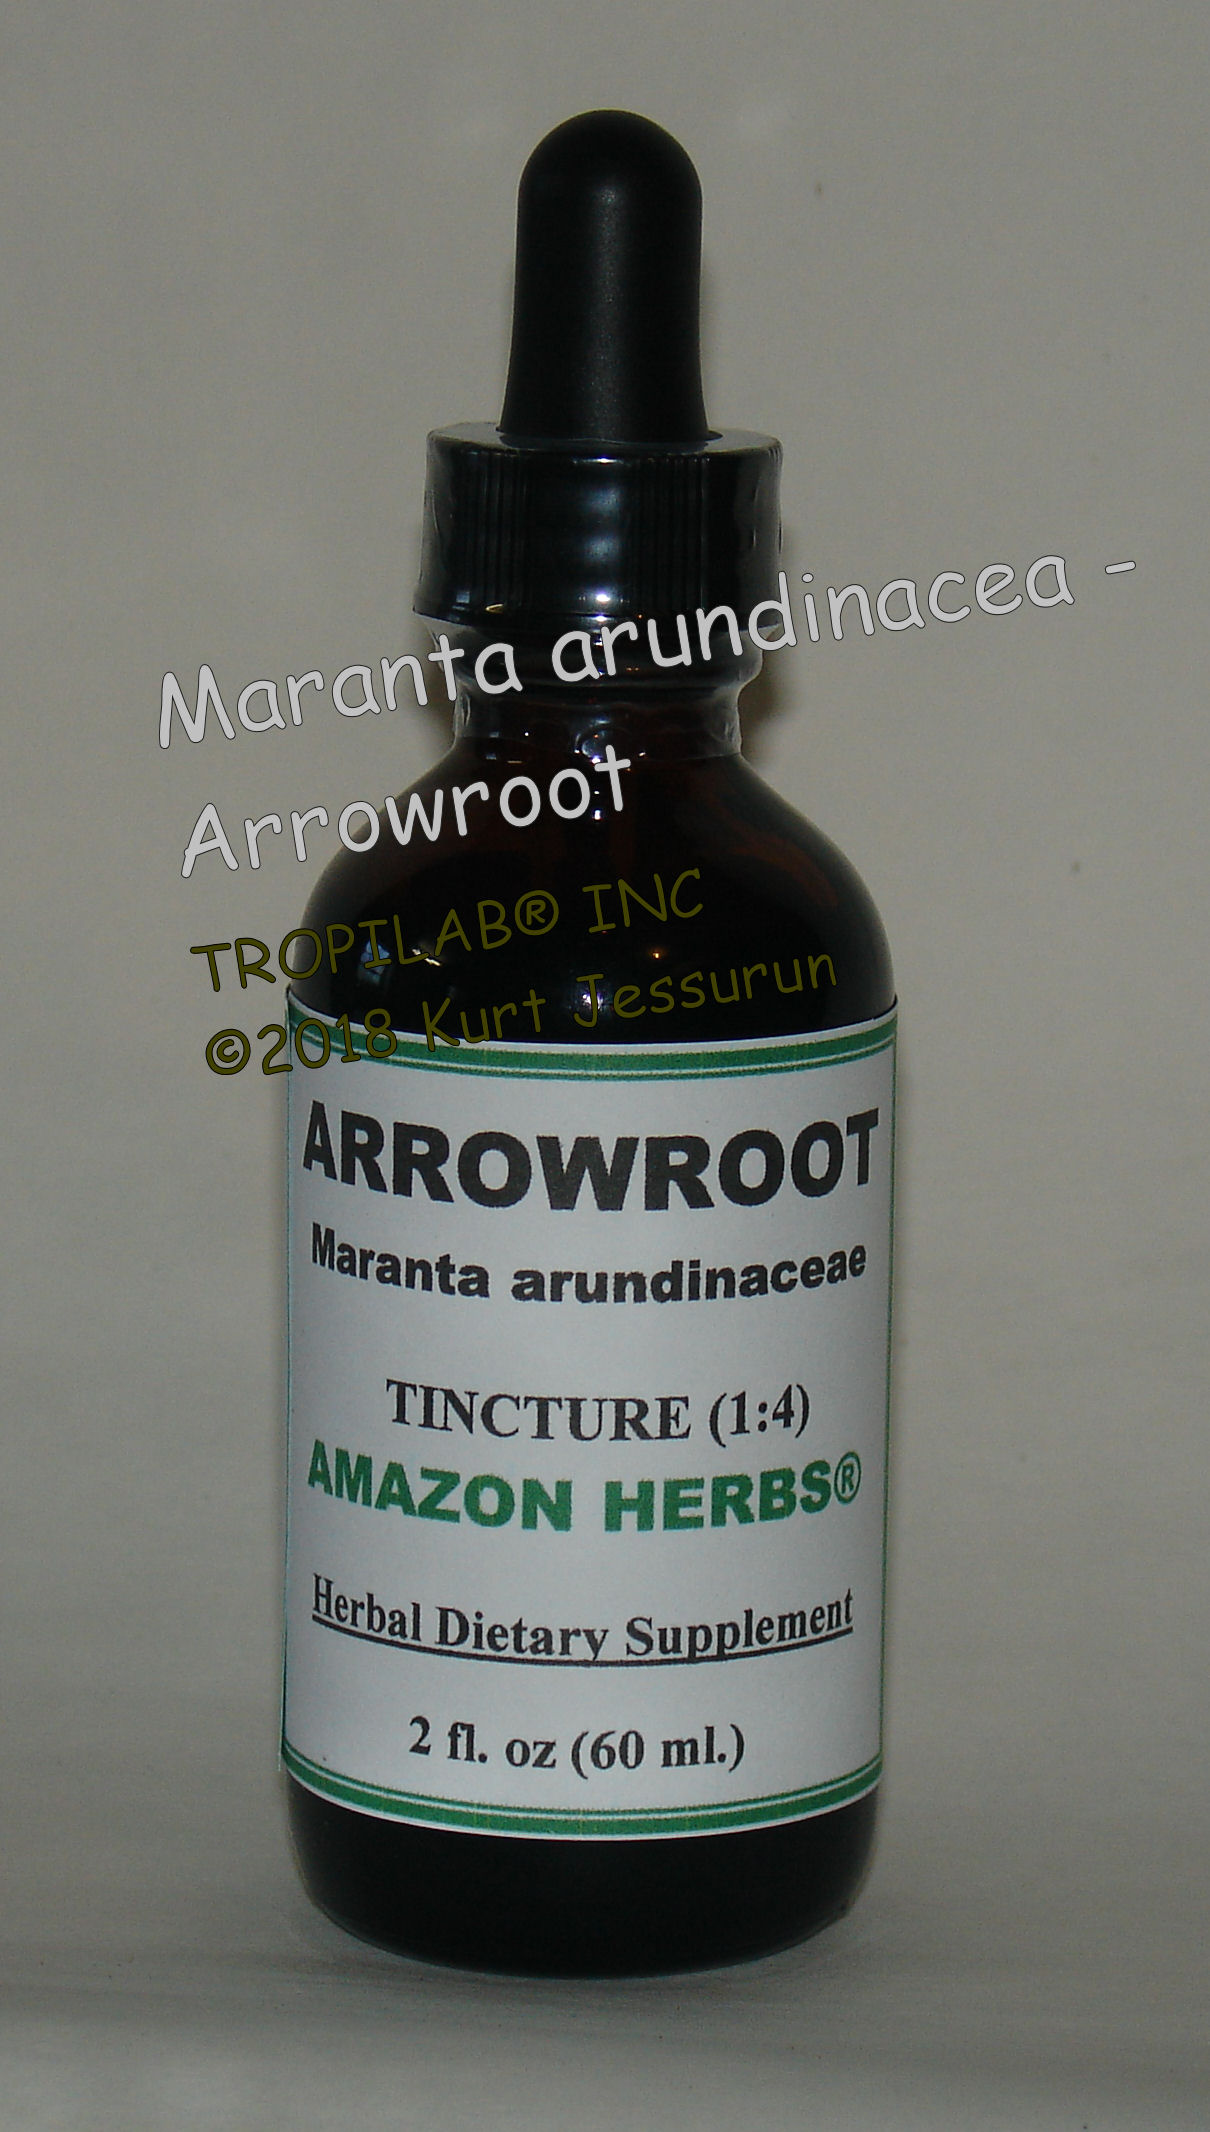 Maranta arundinacea - Arrowroot tincture only for US$18.65 per 2 fl oz.
It is a natural immune system booster and has powerful anti-inflammatory properties. Works naturally against intestinal disorders
 (acute diarrhea), and treats Urinary Tract Infections. It also improves the circulation and blood pressure; also lowers cholesterol.